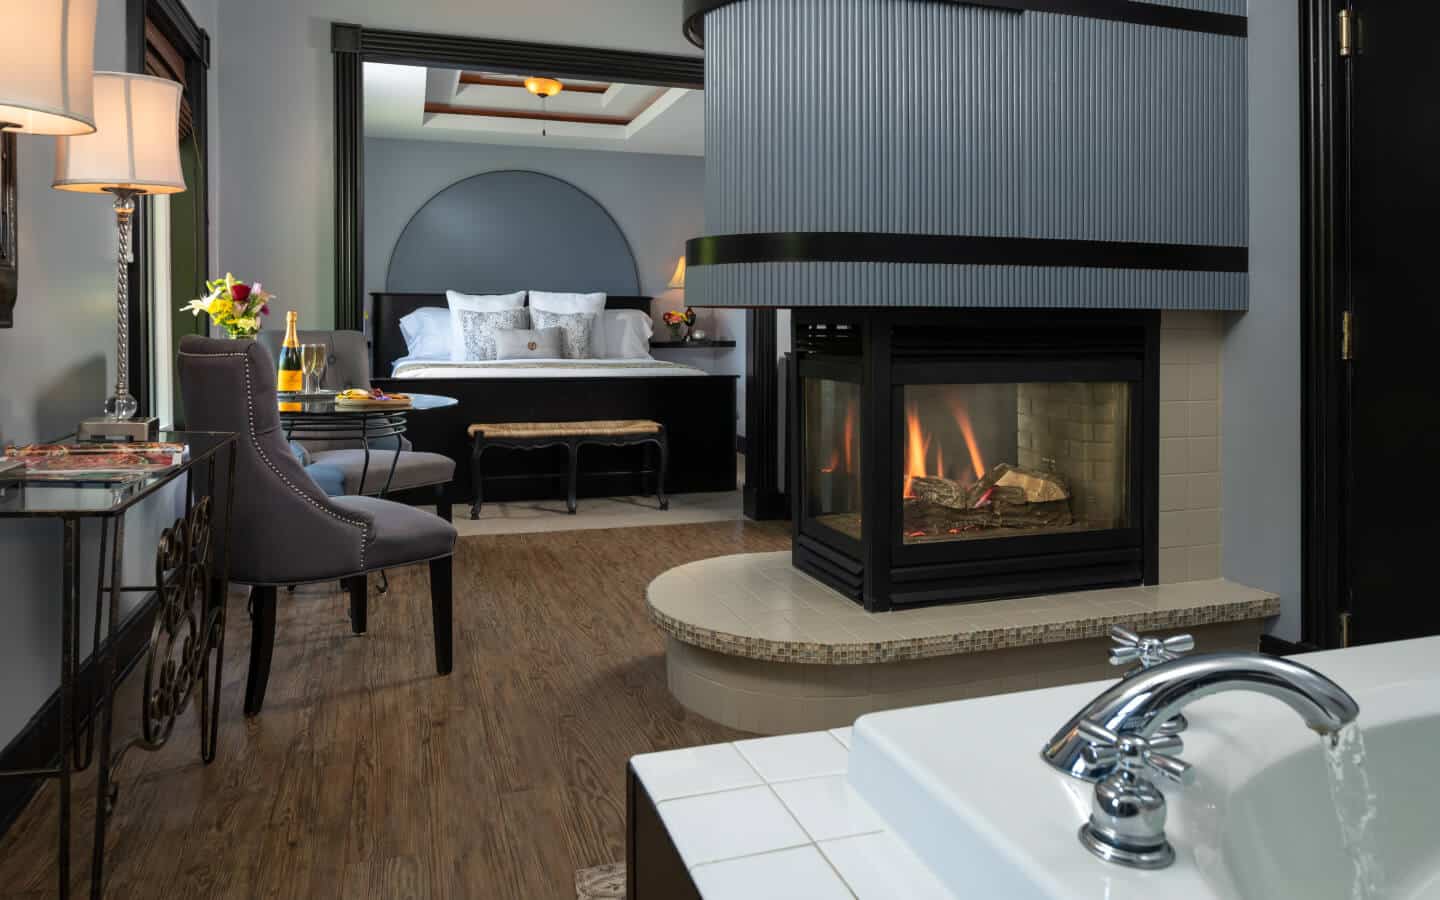 Sir Lancelot Suite fireplace, jetted tub, seating area